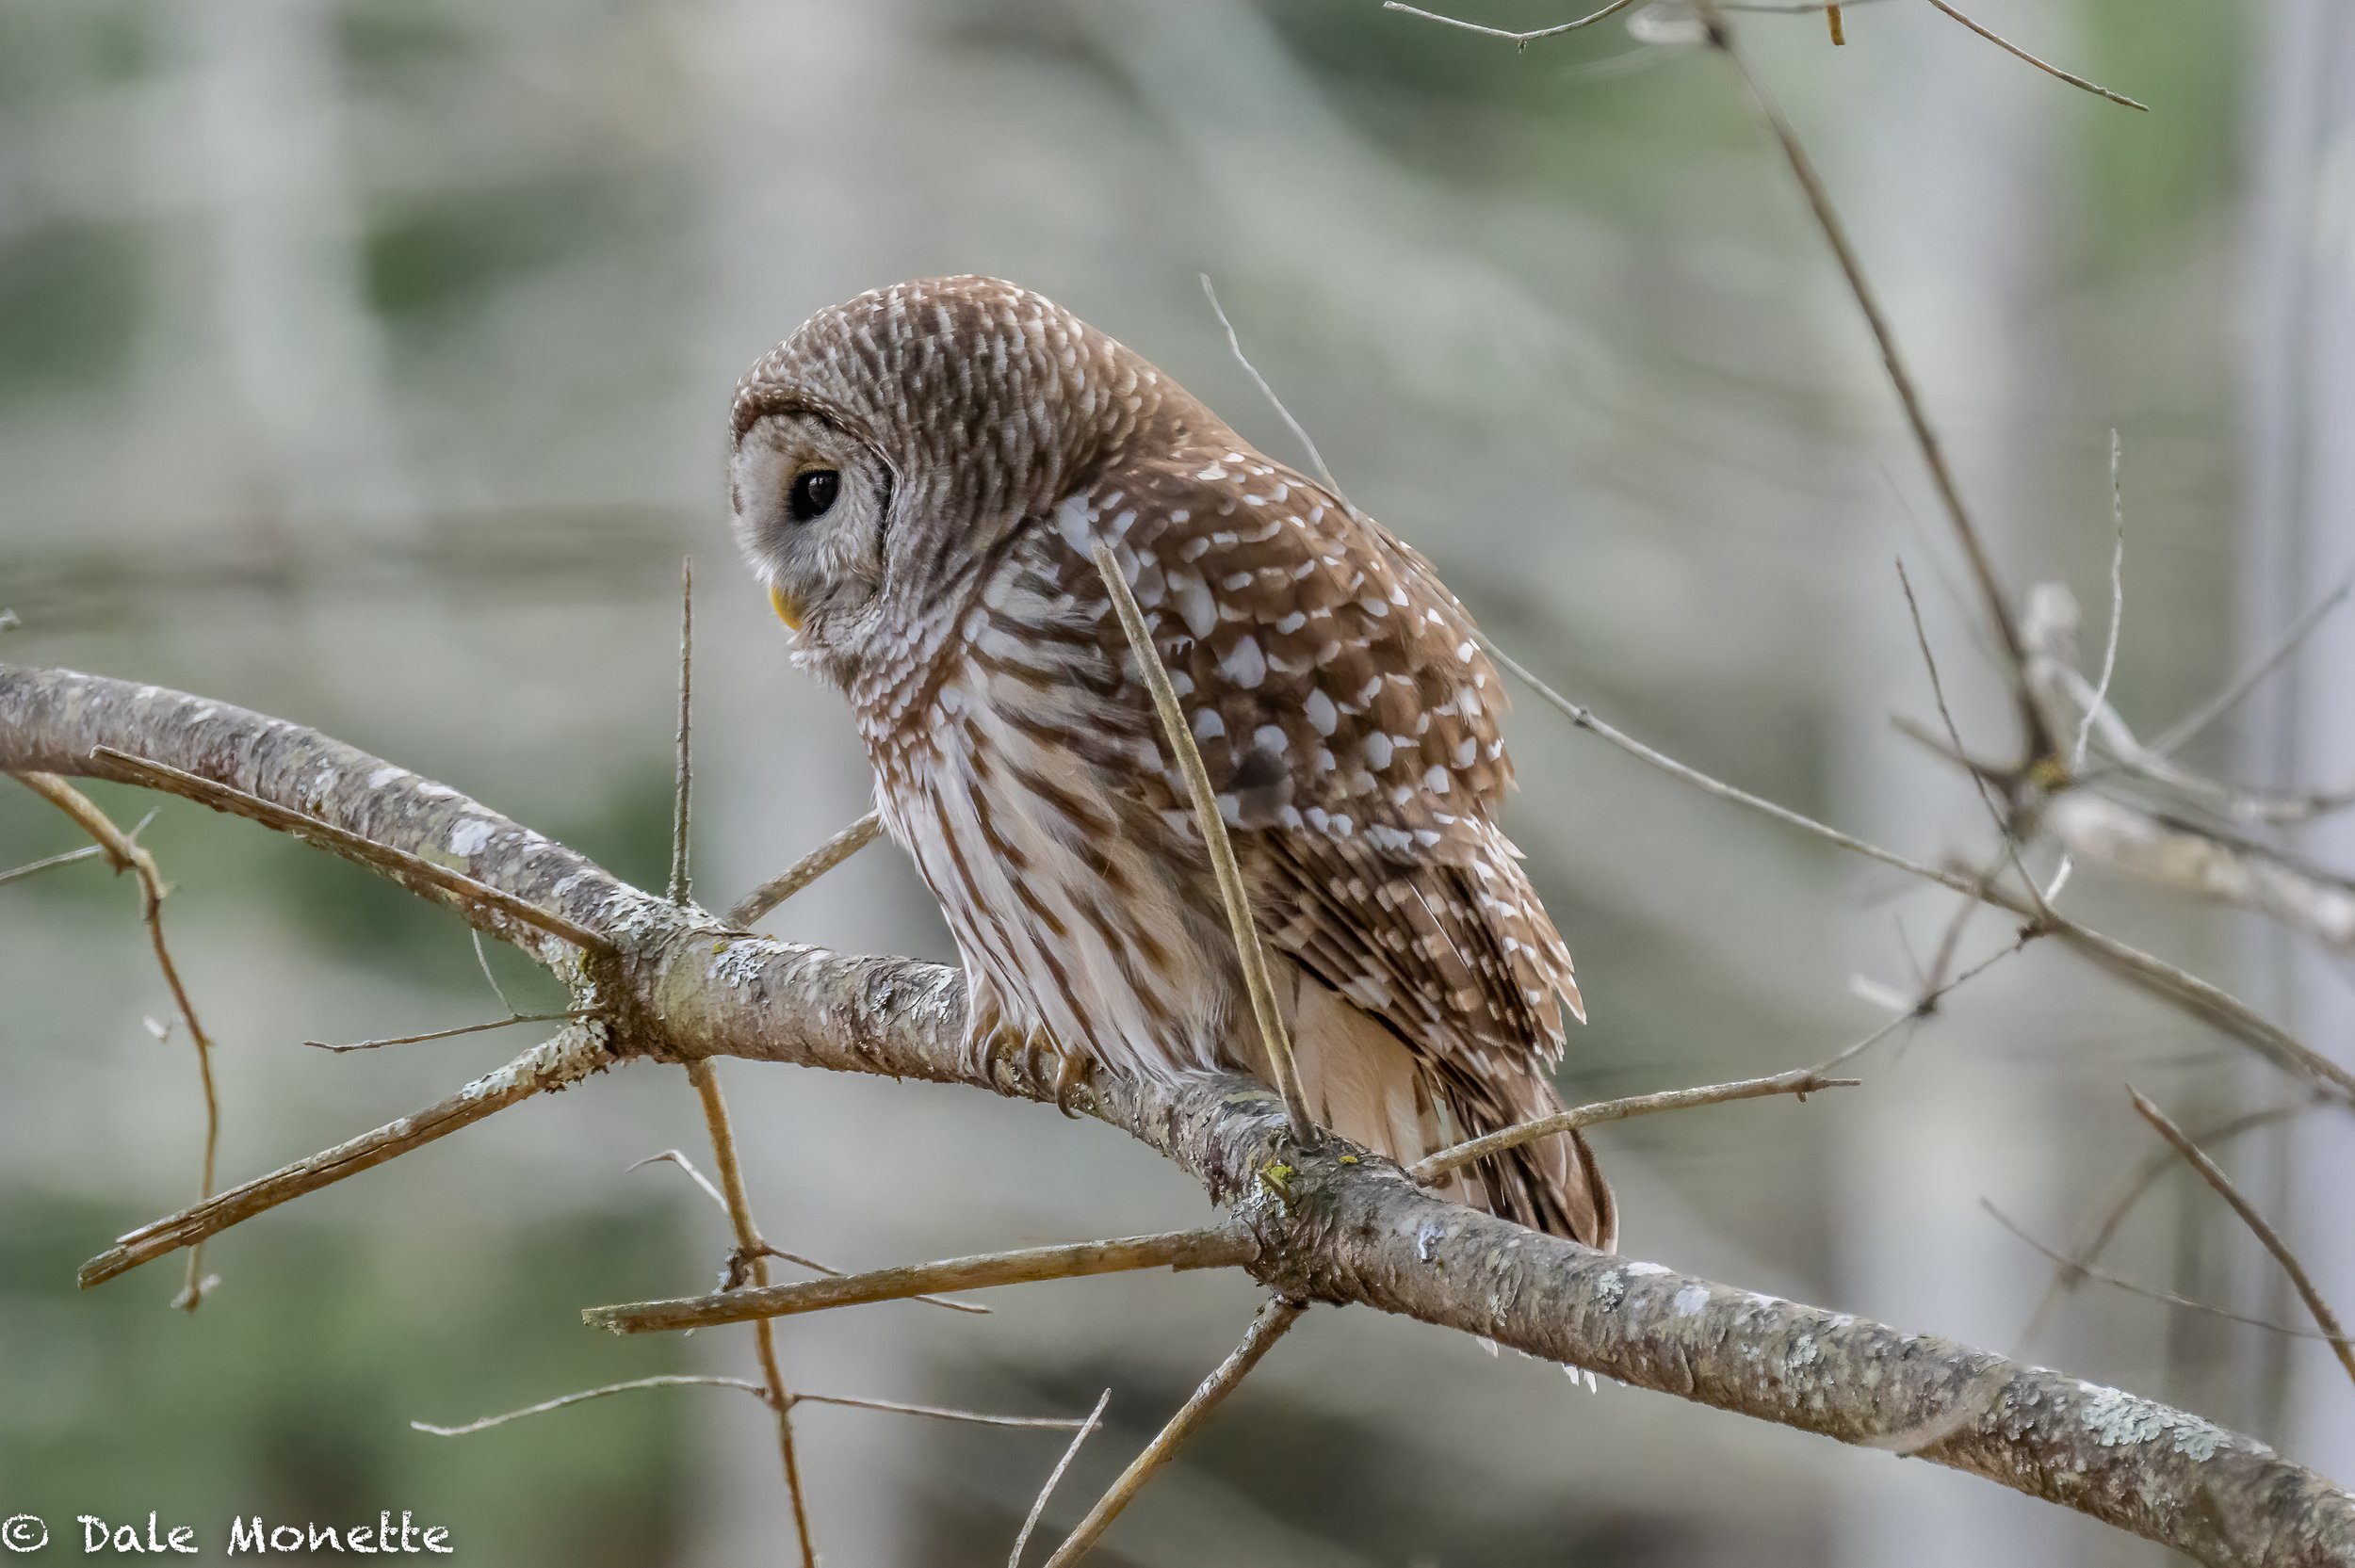   One of the many barred owls that are hunting the woods and fields this year in the North Quabbin area.  Always fun to watch and photograph.  